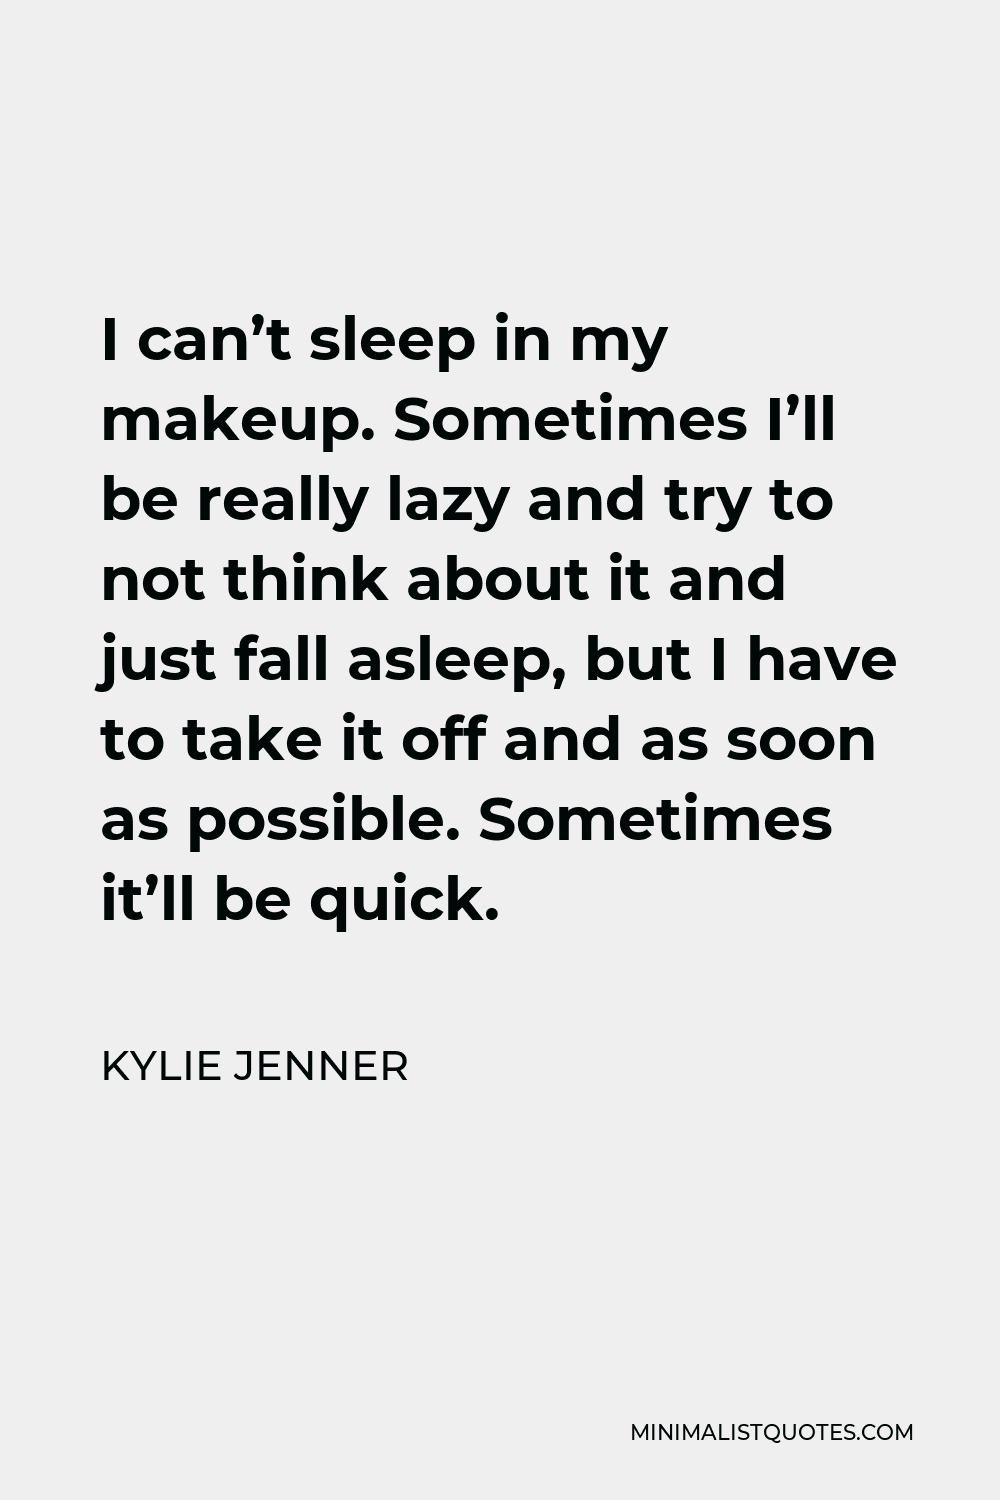 Kylie Jenner Quote - I can’t sleep in my makeup. Sometimes I’ll be really lazy and try to not think about it and just fall asleep, but I have to take it off and as soon as possible. Sometimes it’ll be quick.